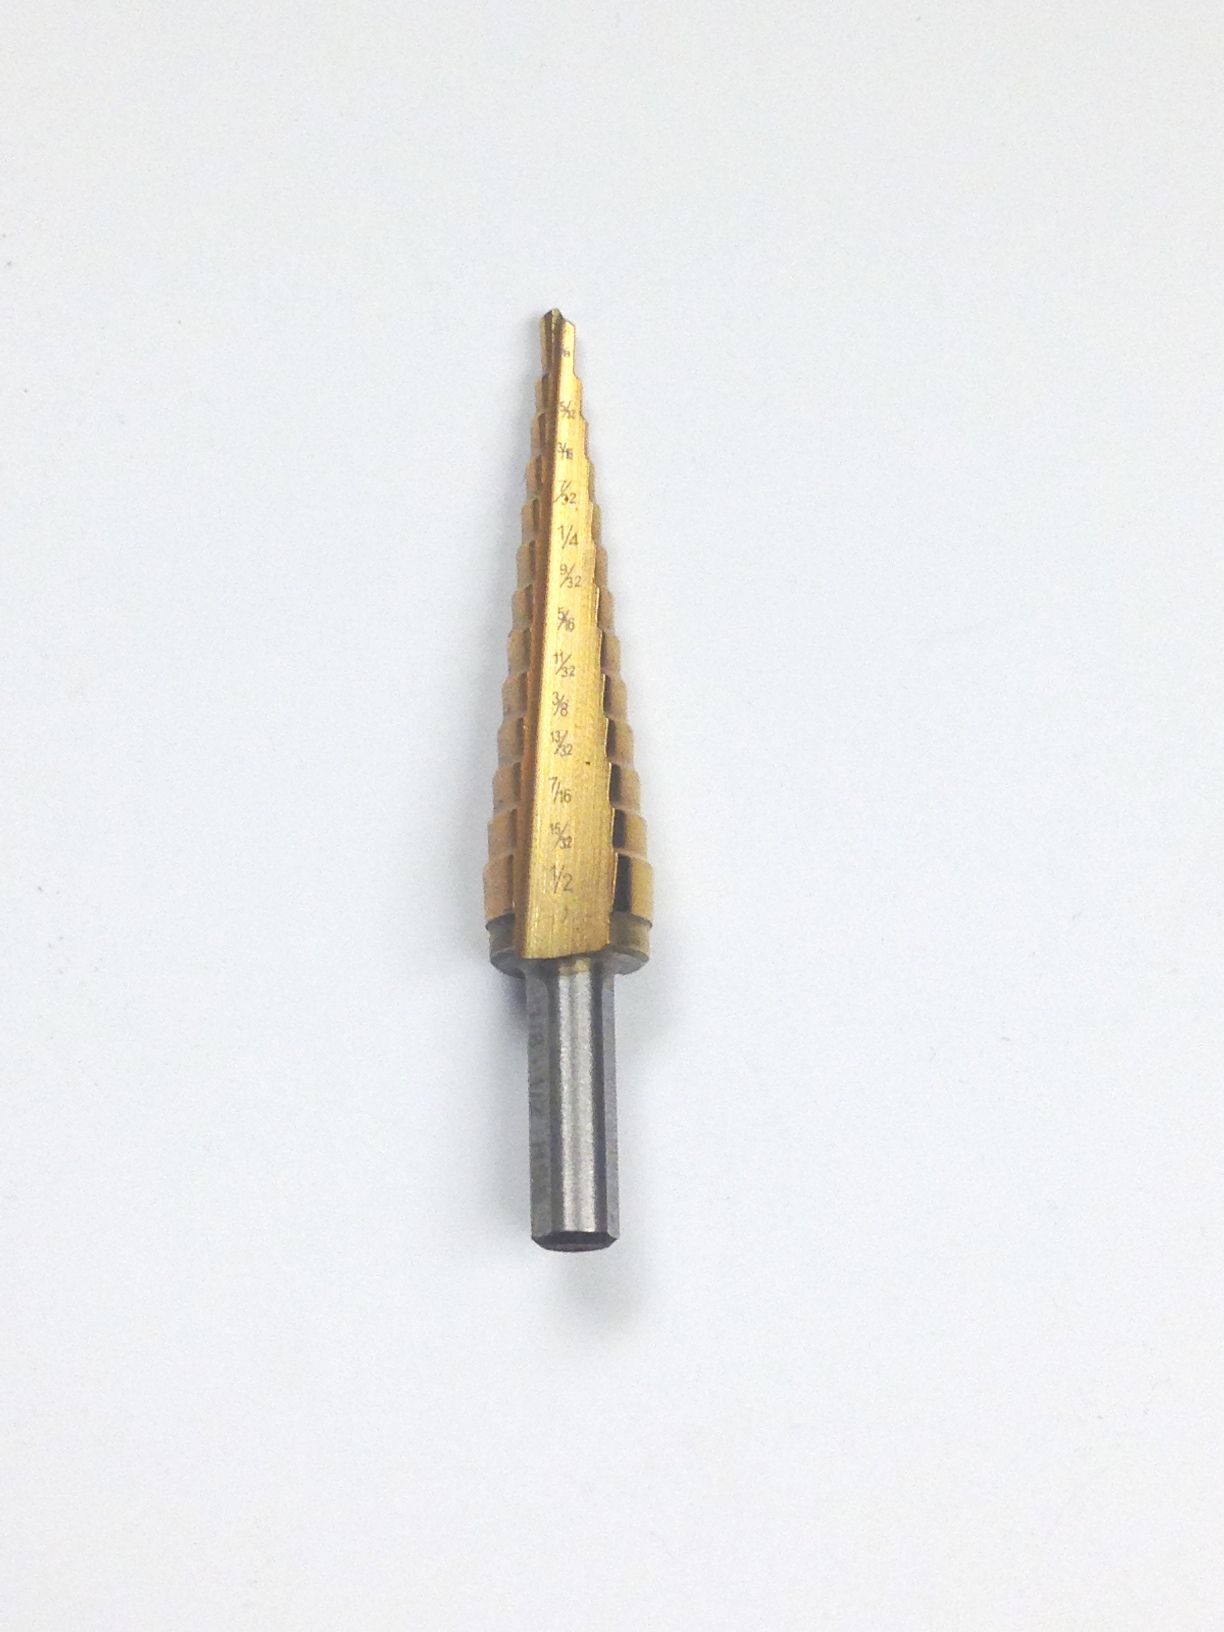 1/8-1/2" TiN COATED HIGH SPEED STEEL STEP DRILL WITH 13 STEPS (5000-0500)